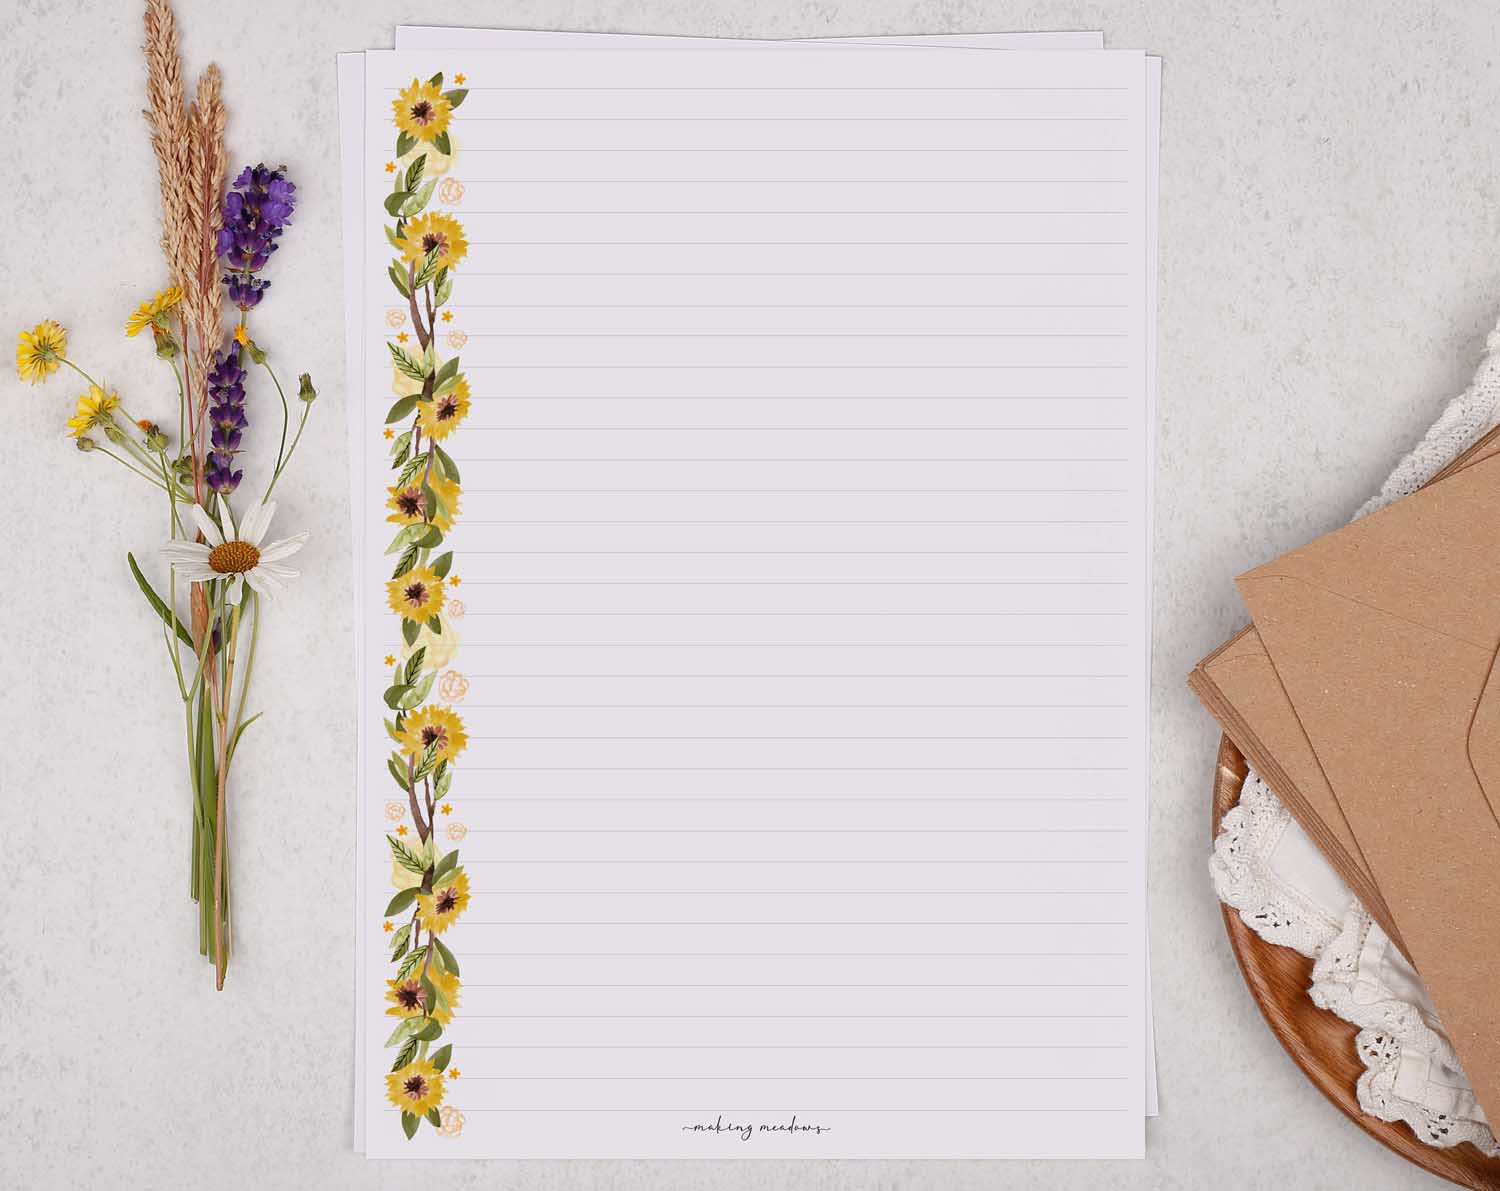 A4 letter writing paper sheets with a yellow sunflower border around the letter paper in a delicate flower pattern. 